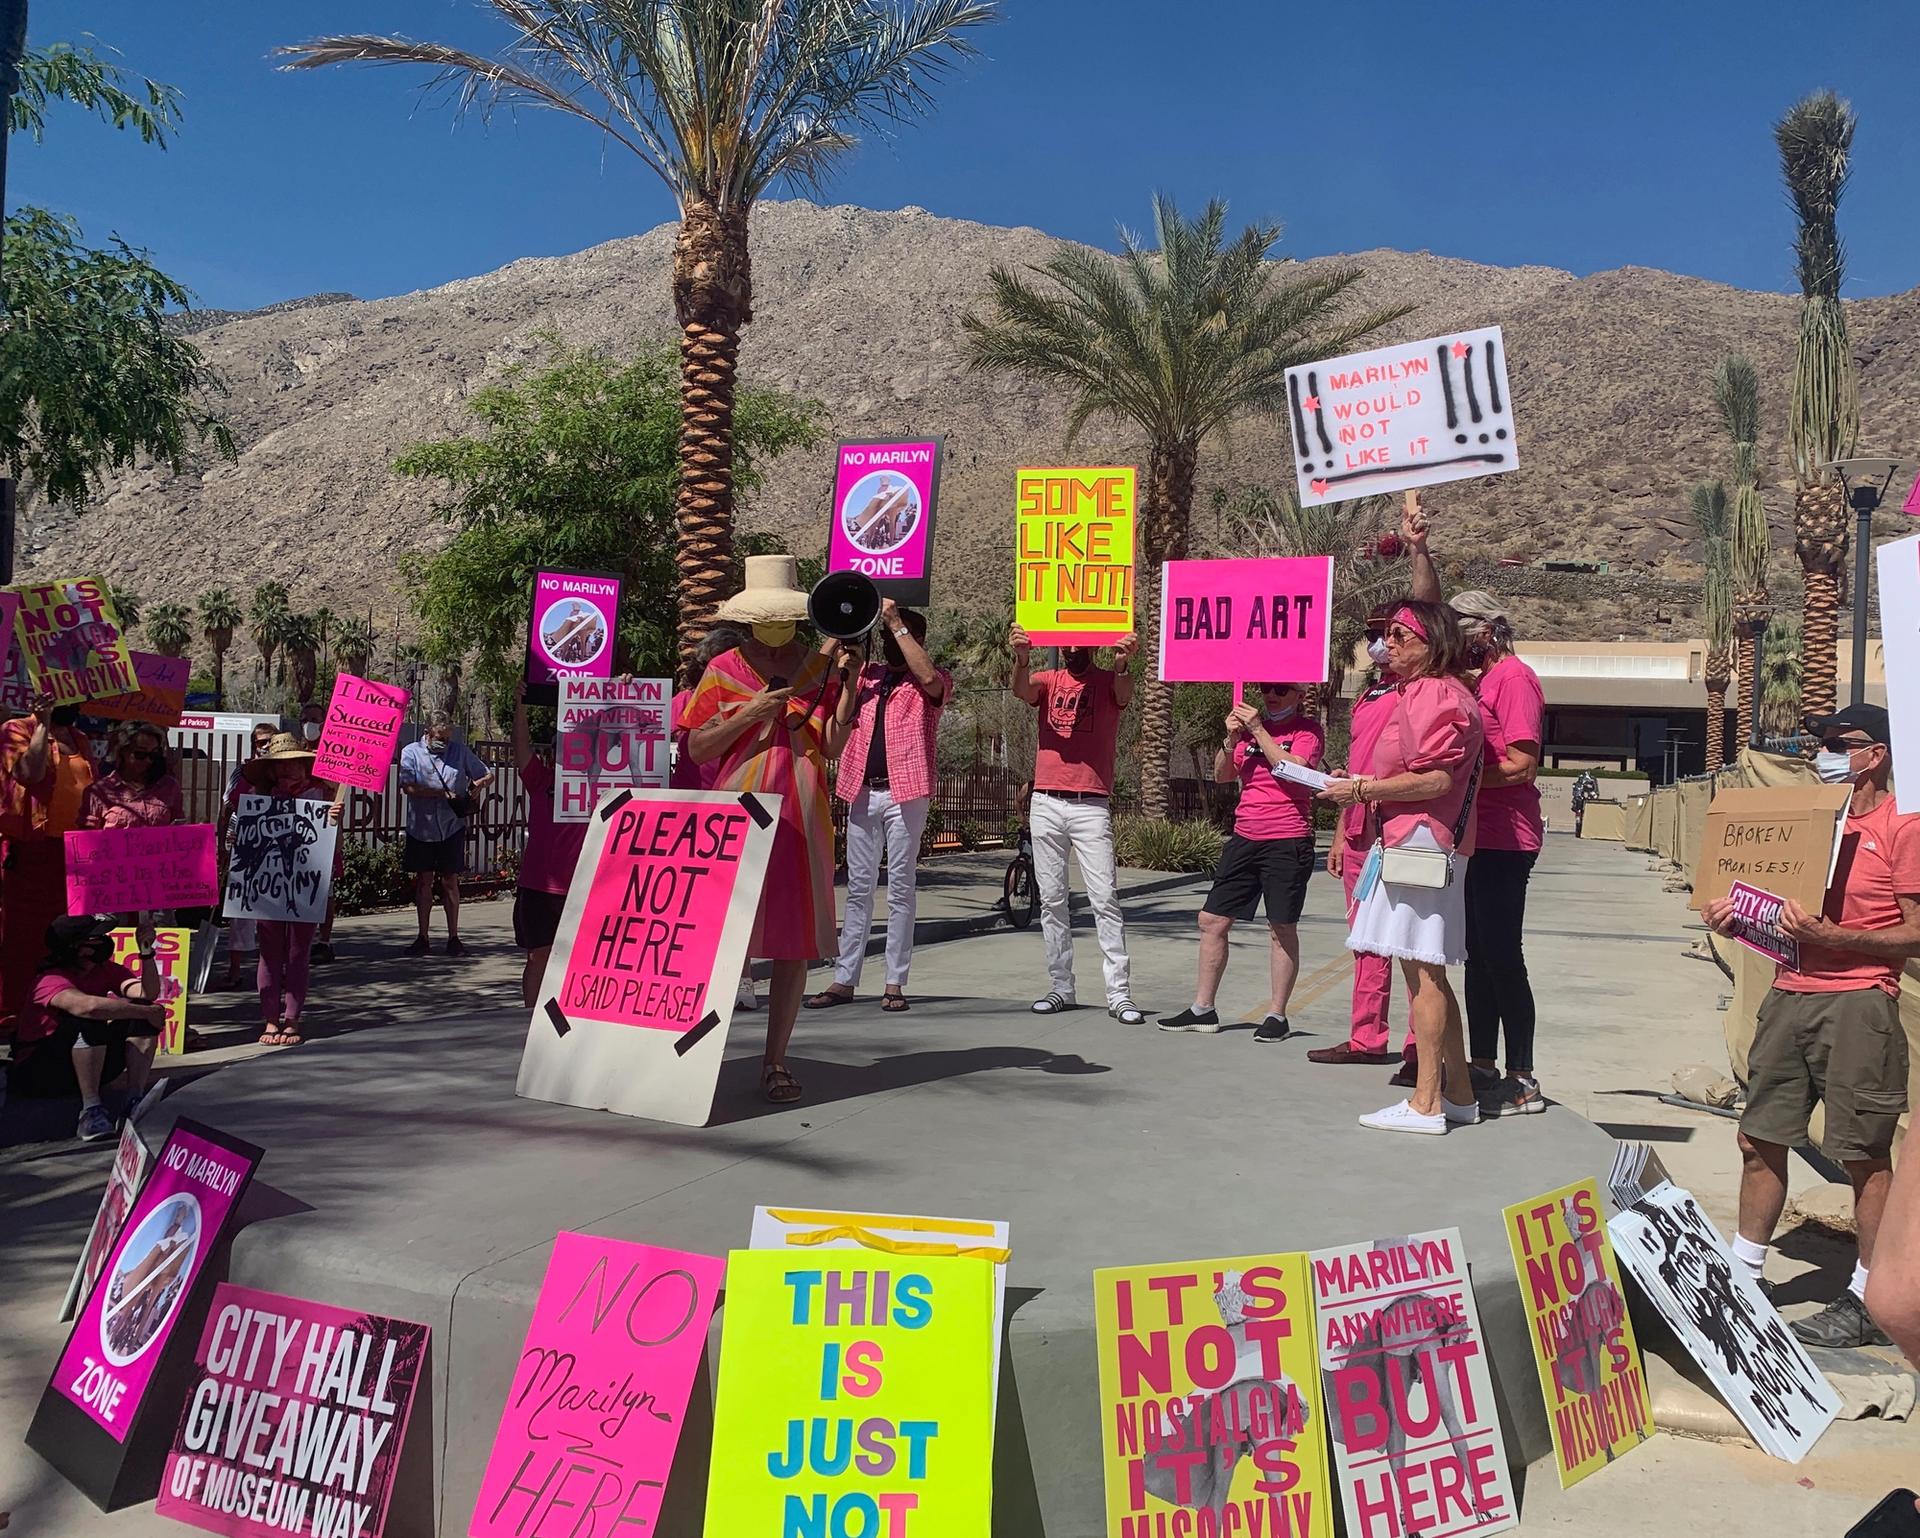 Protesters opposing the installation of a Marilyn Monroe sculpture on a site next to the Palm Springs Art Museum Helene Verin